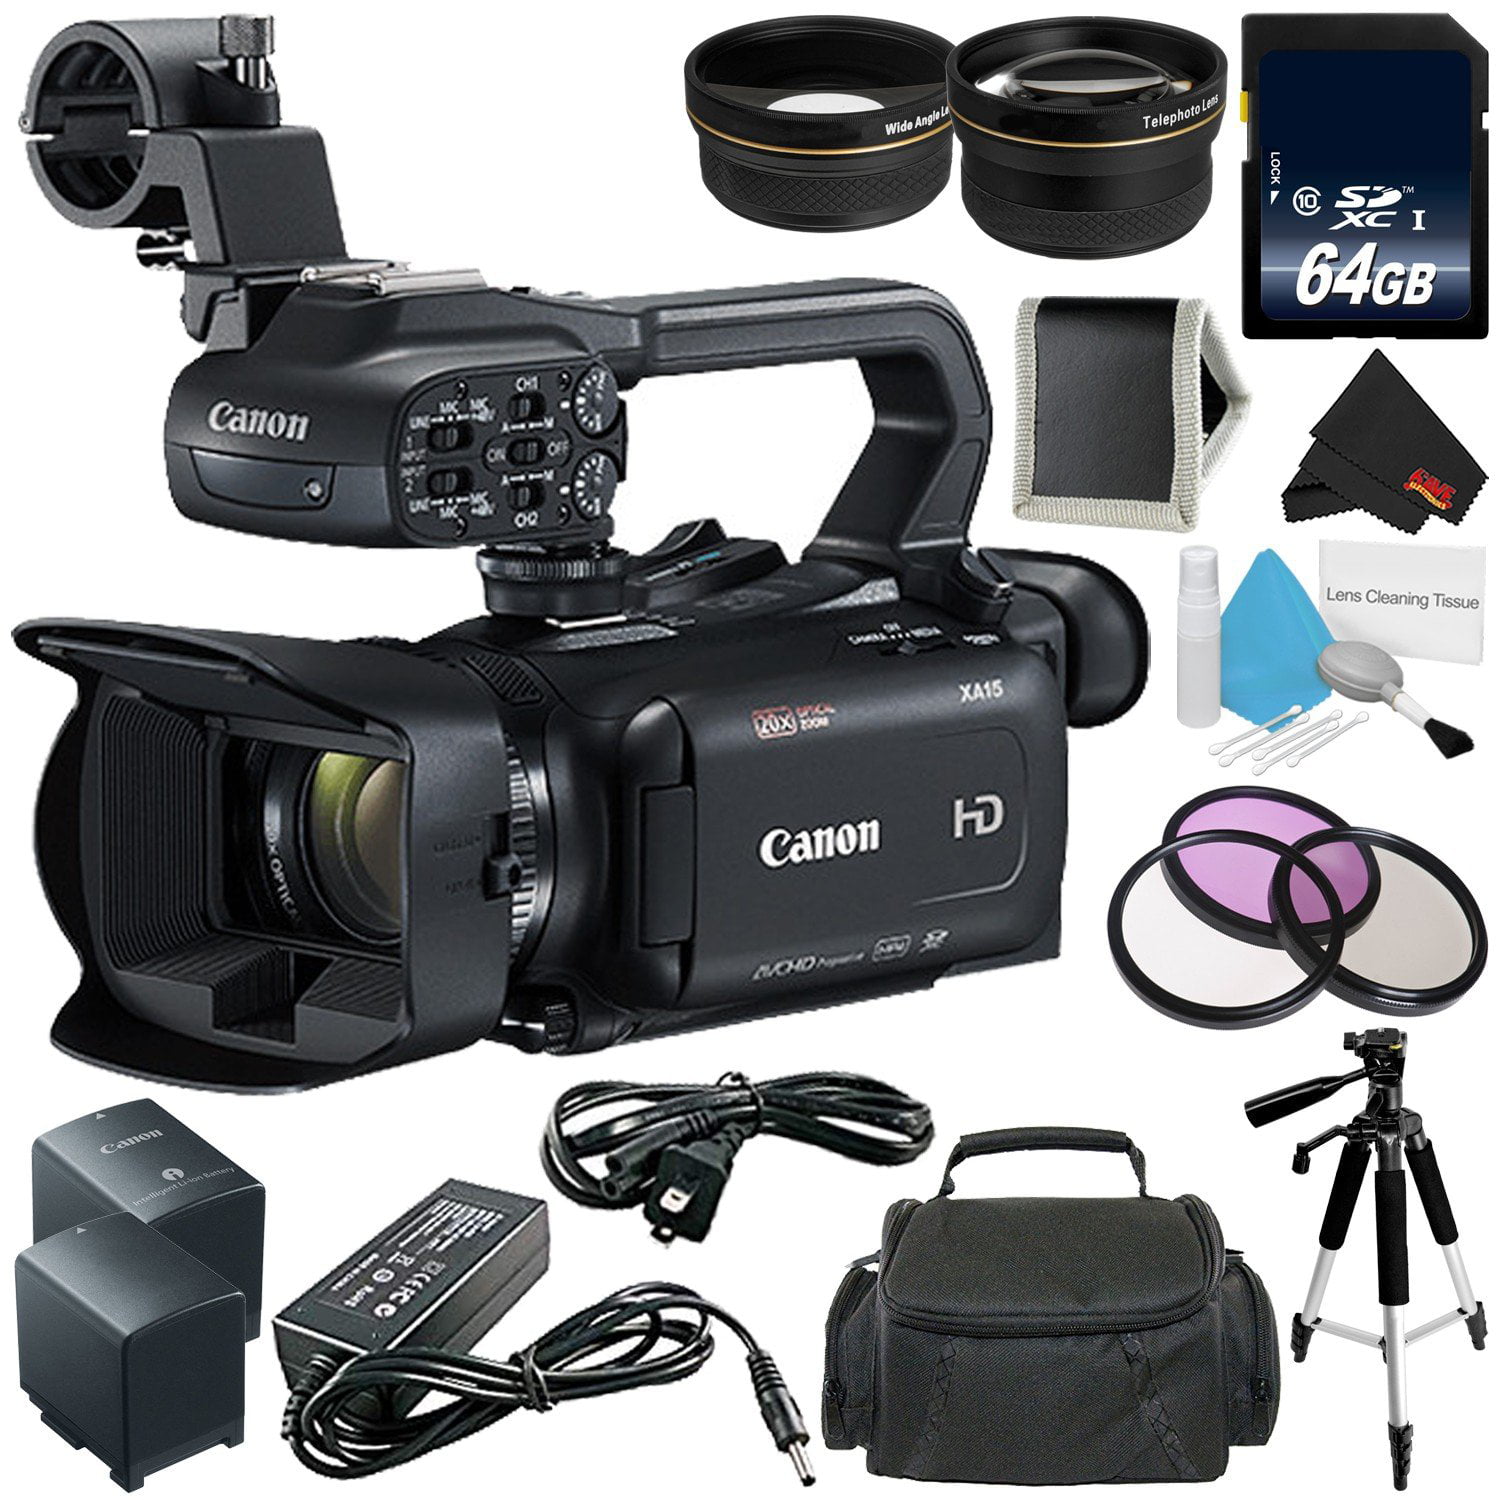 Canon XA15 Compact Professional Camcorder - Full HD with SDI, HDMI and Bundle 8